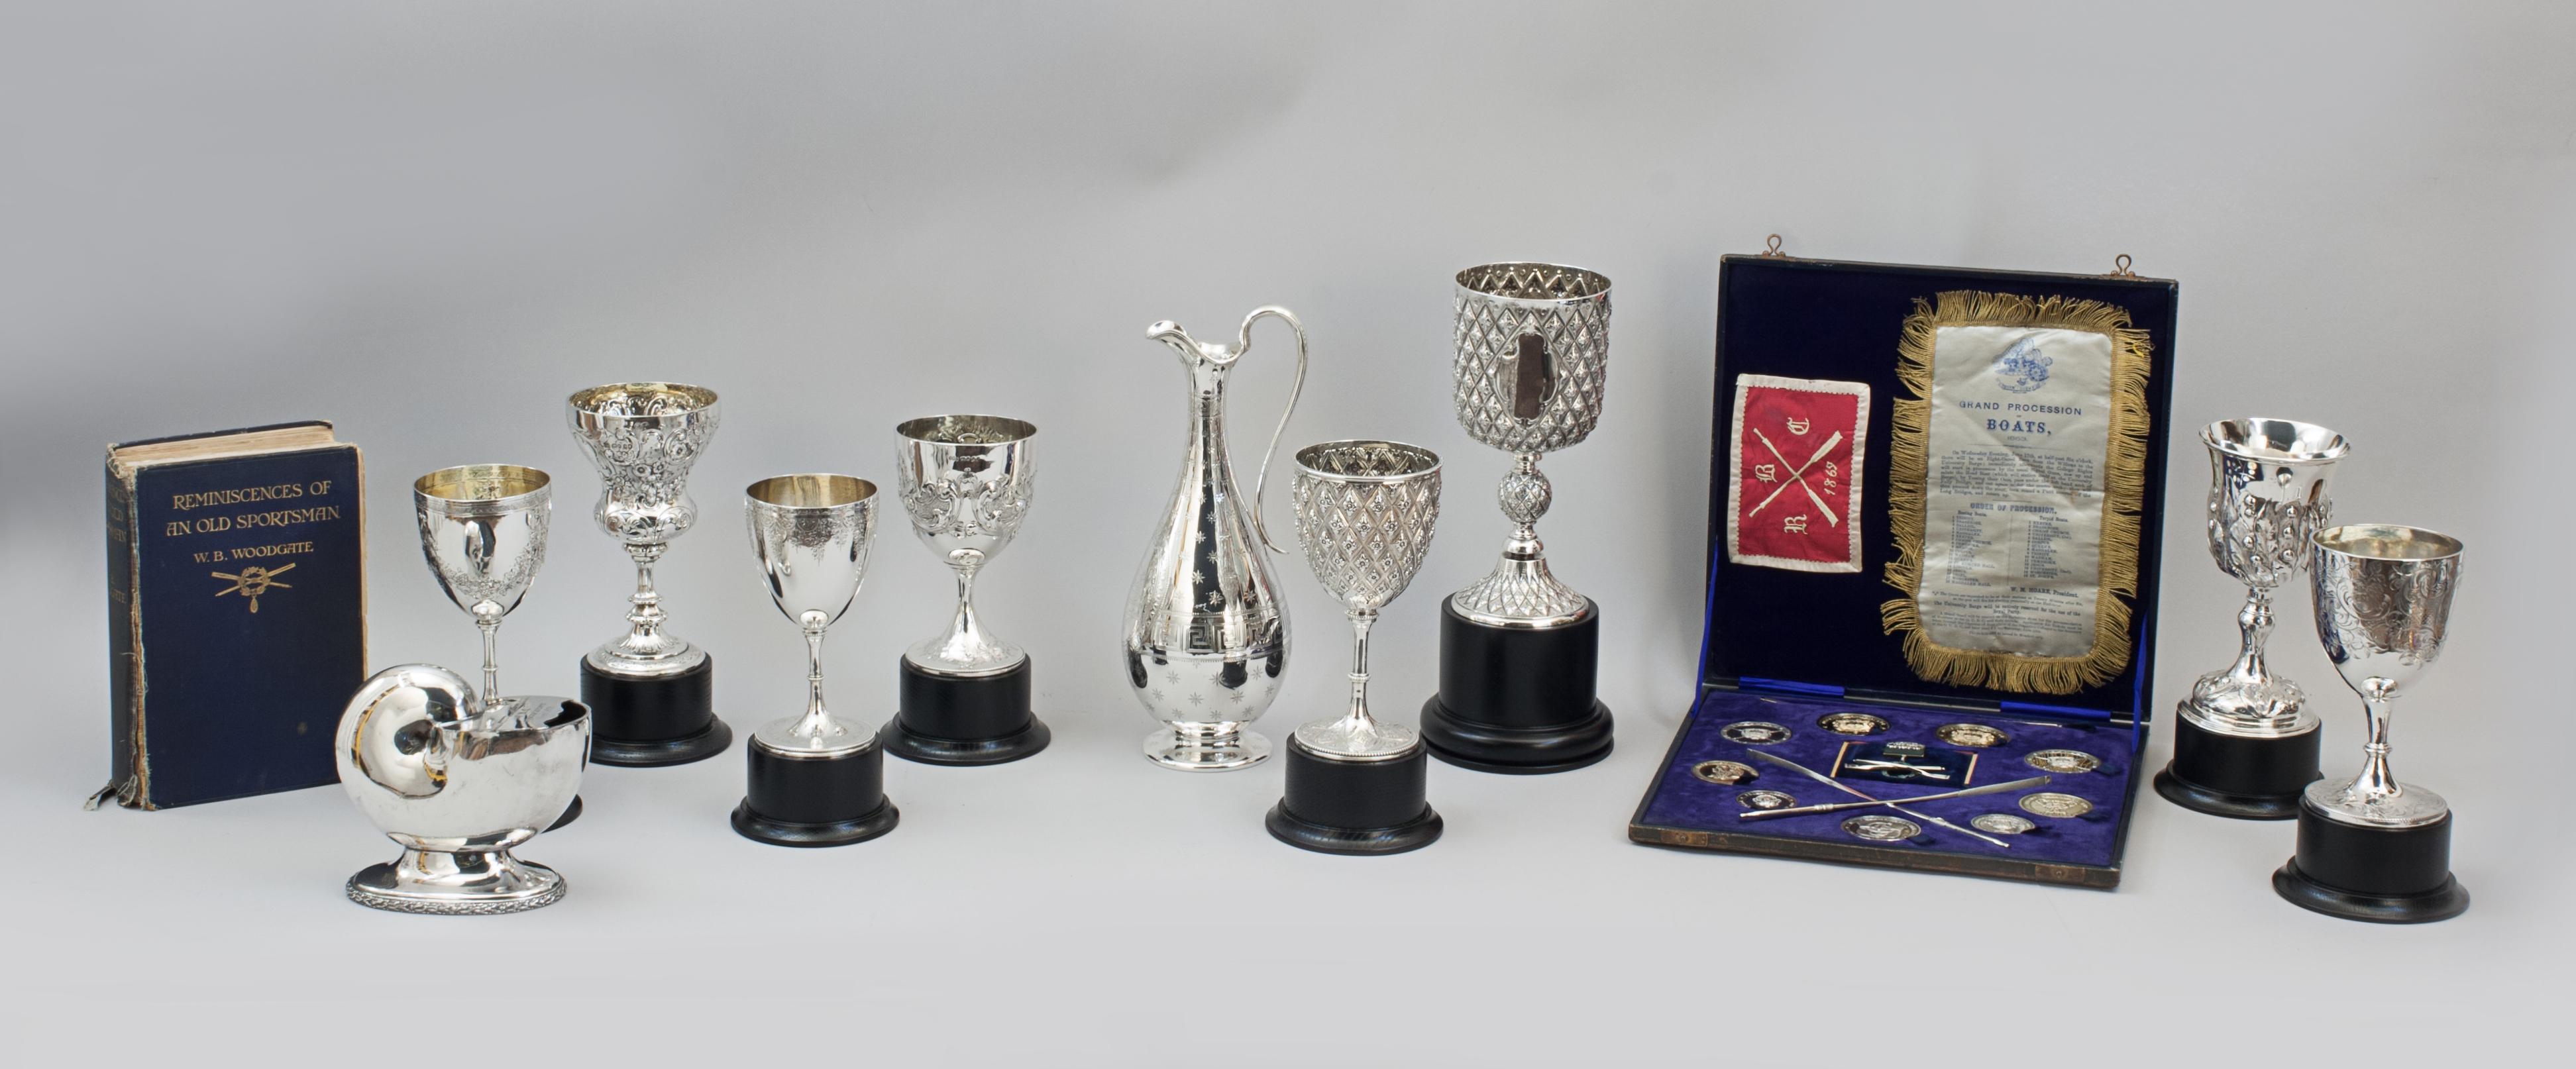 Collection Of Very Rare Rowing Trophies, Medals & Silver Oars.
This outstanding collection of Henley Regatta and Oxford University medals, medallions, cups has a very historic rowing interest, being awarded to Walter Bradford Woodgate over his